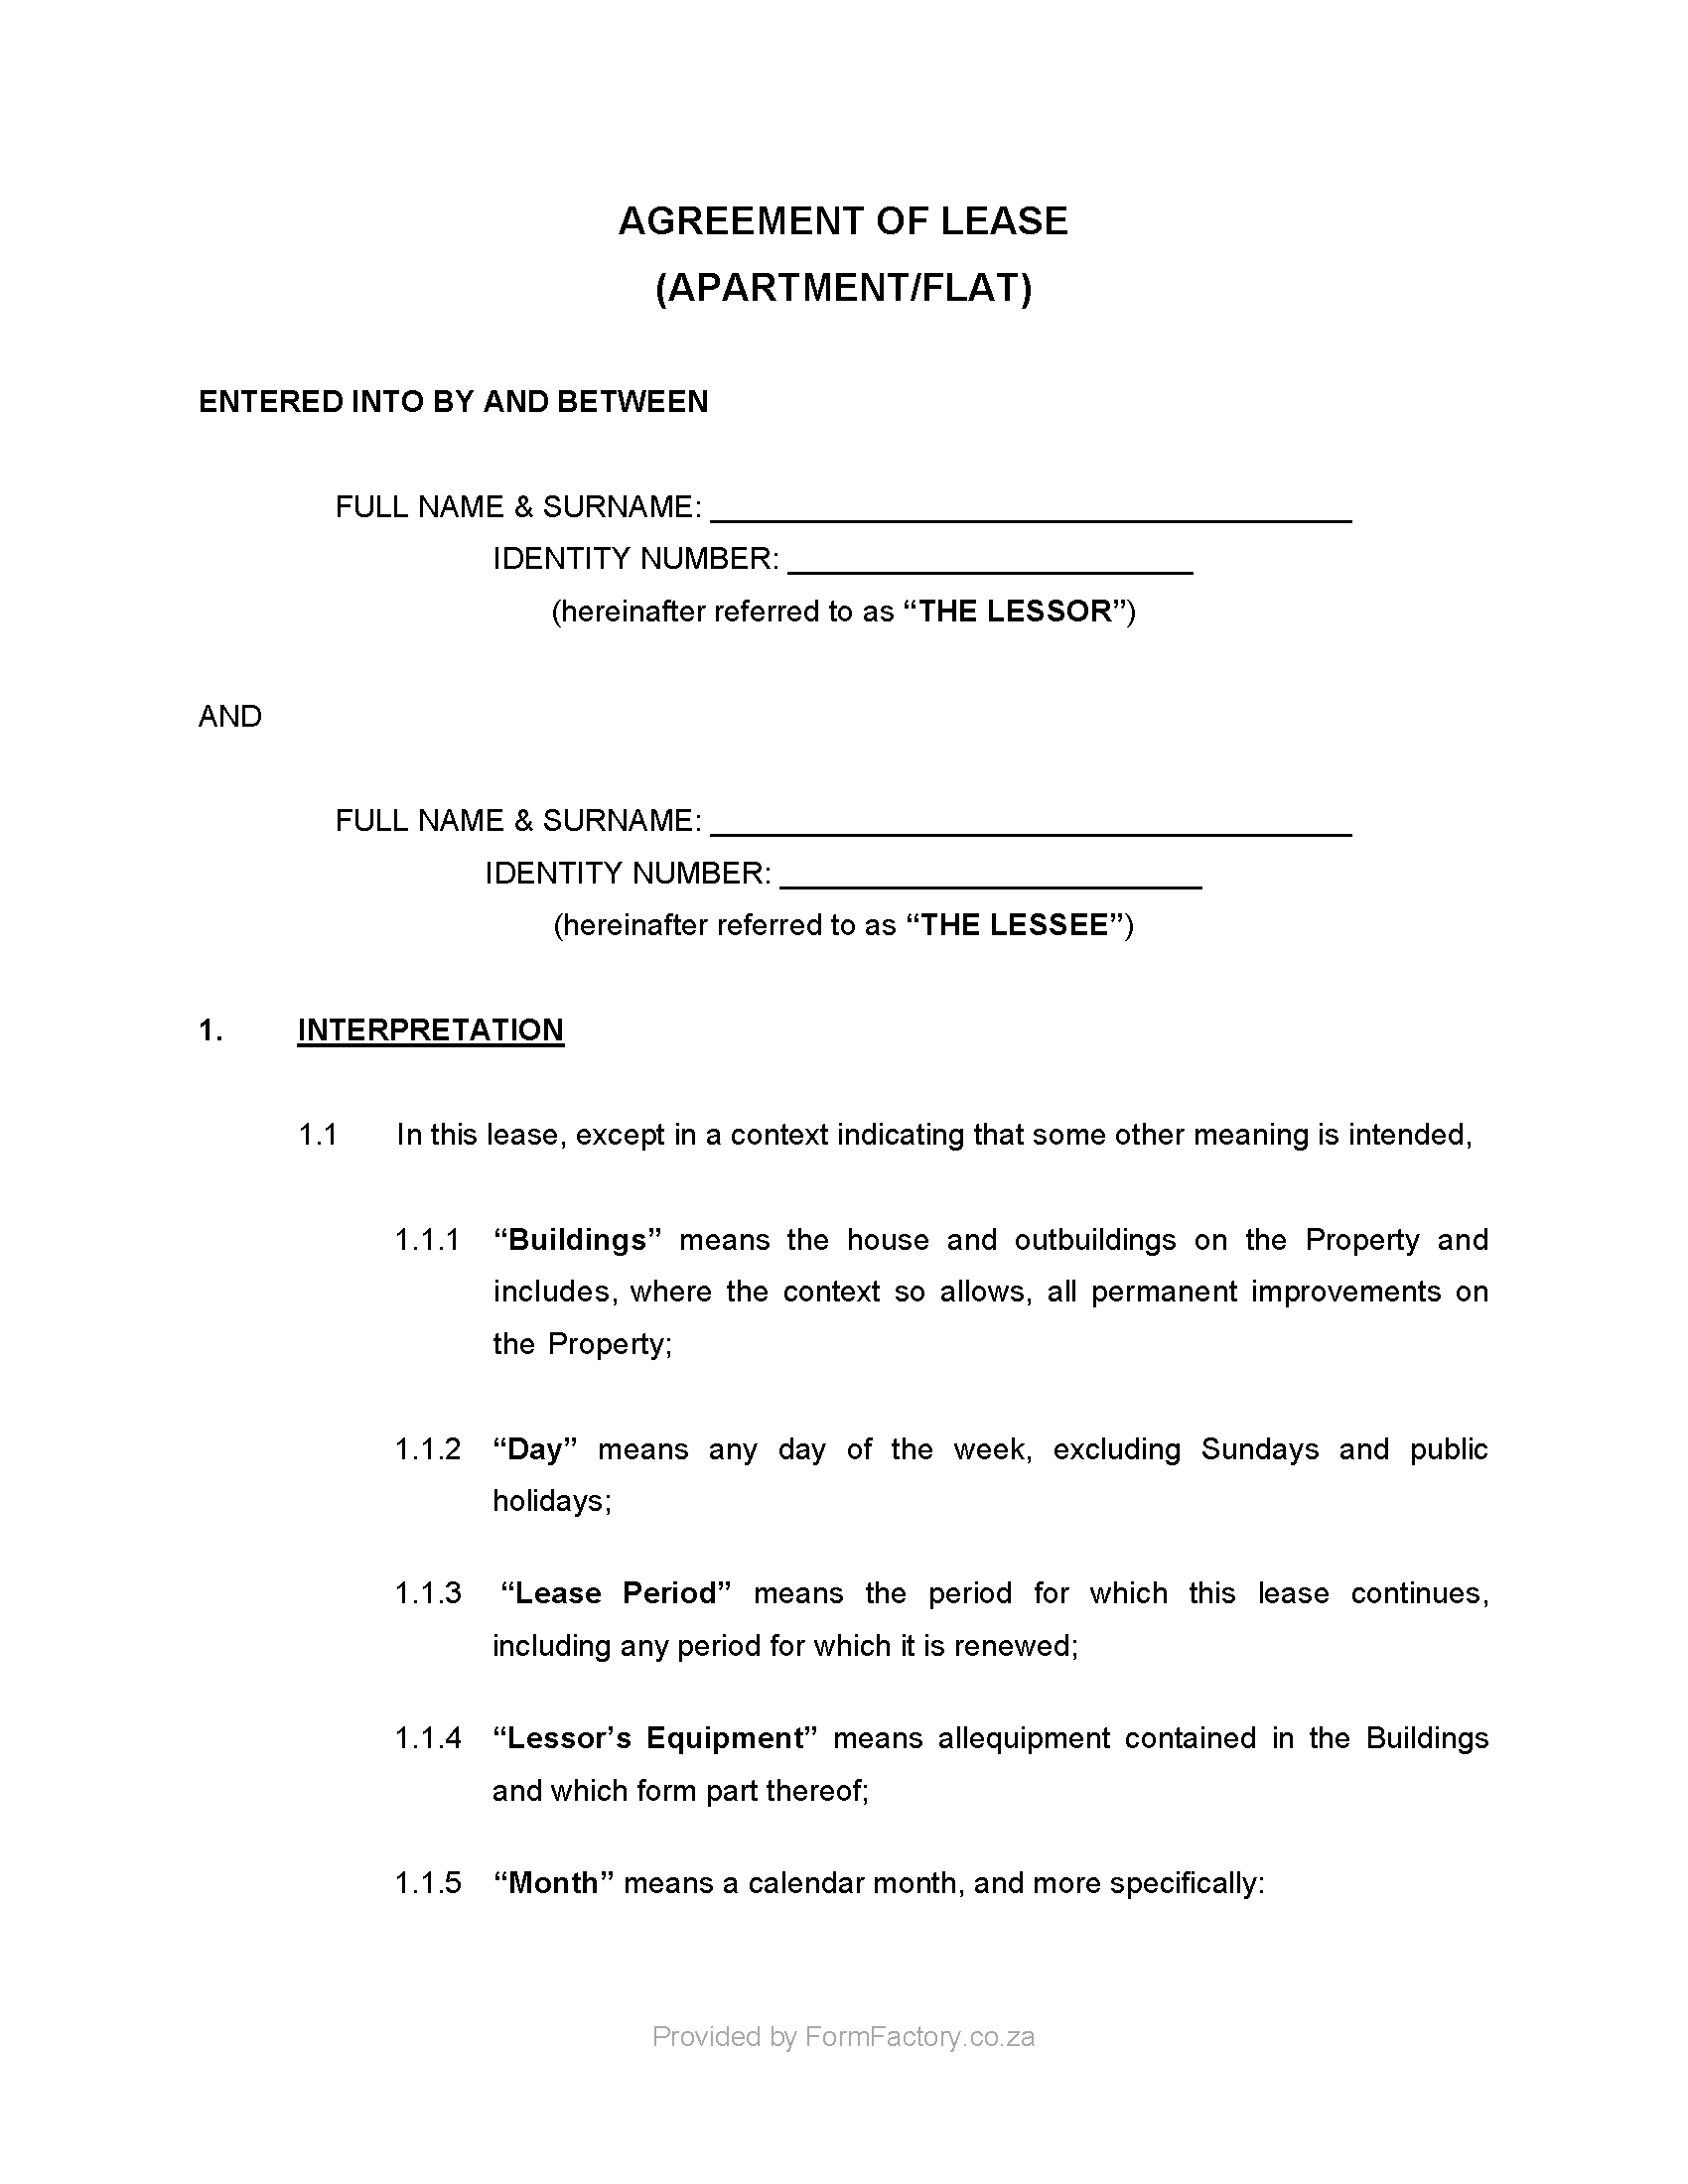 Download Residential Lease Agreement Template  Formfactory inside Cpa Hire Agreement Template